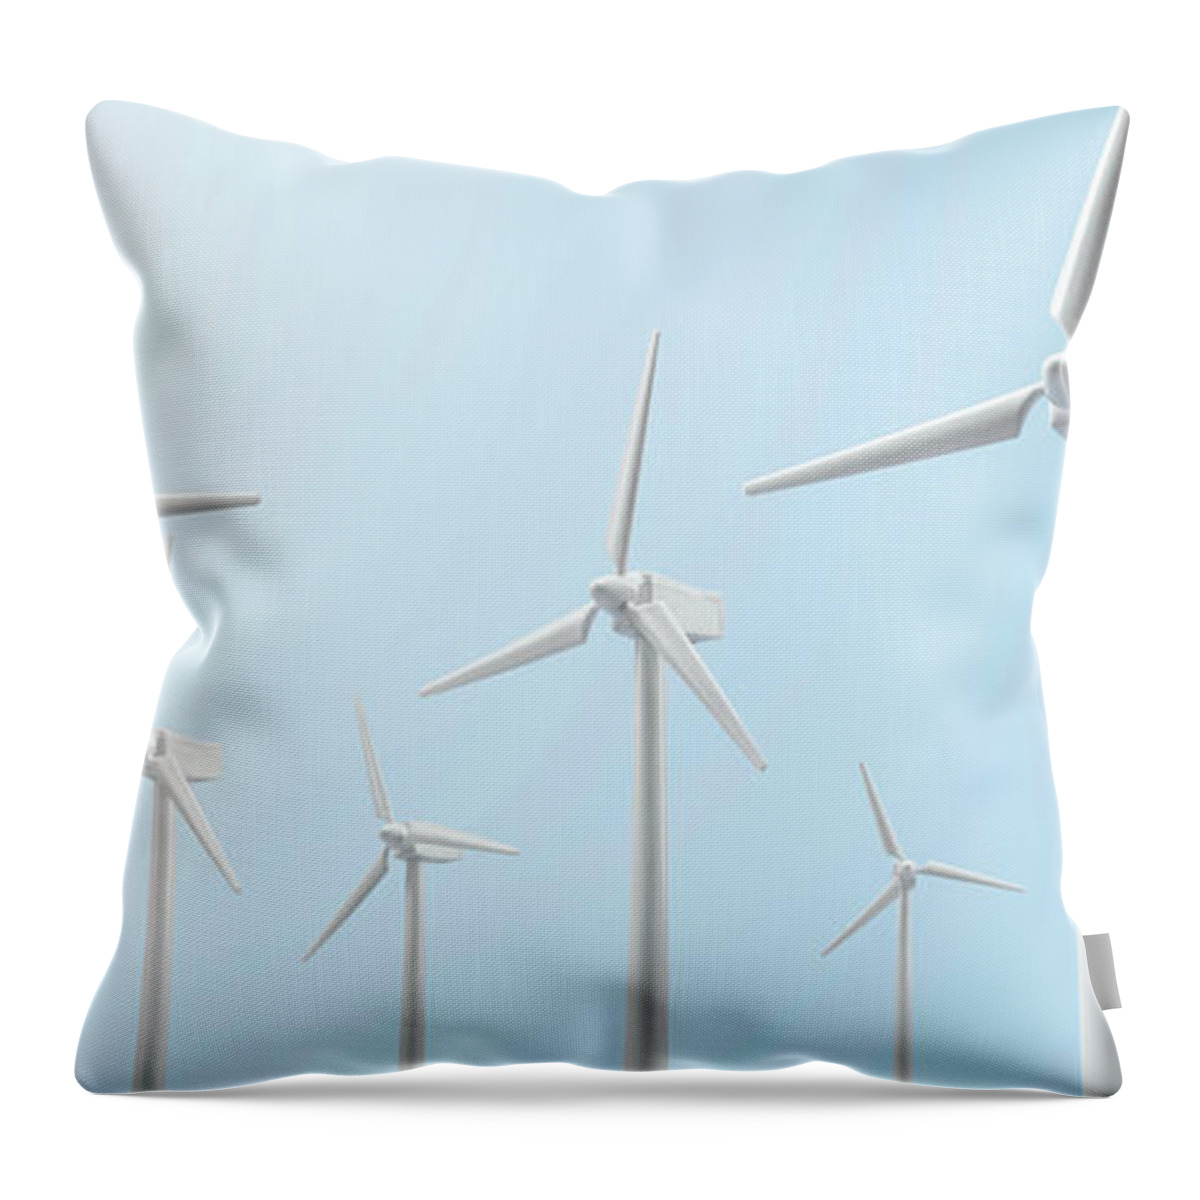 Environmental Conservation Throw Pillow featuring the photograph A Group Of Wind Turbines by Yagi Studio